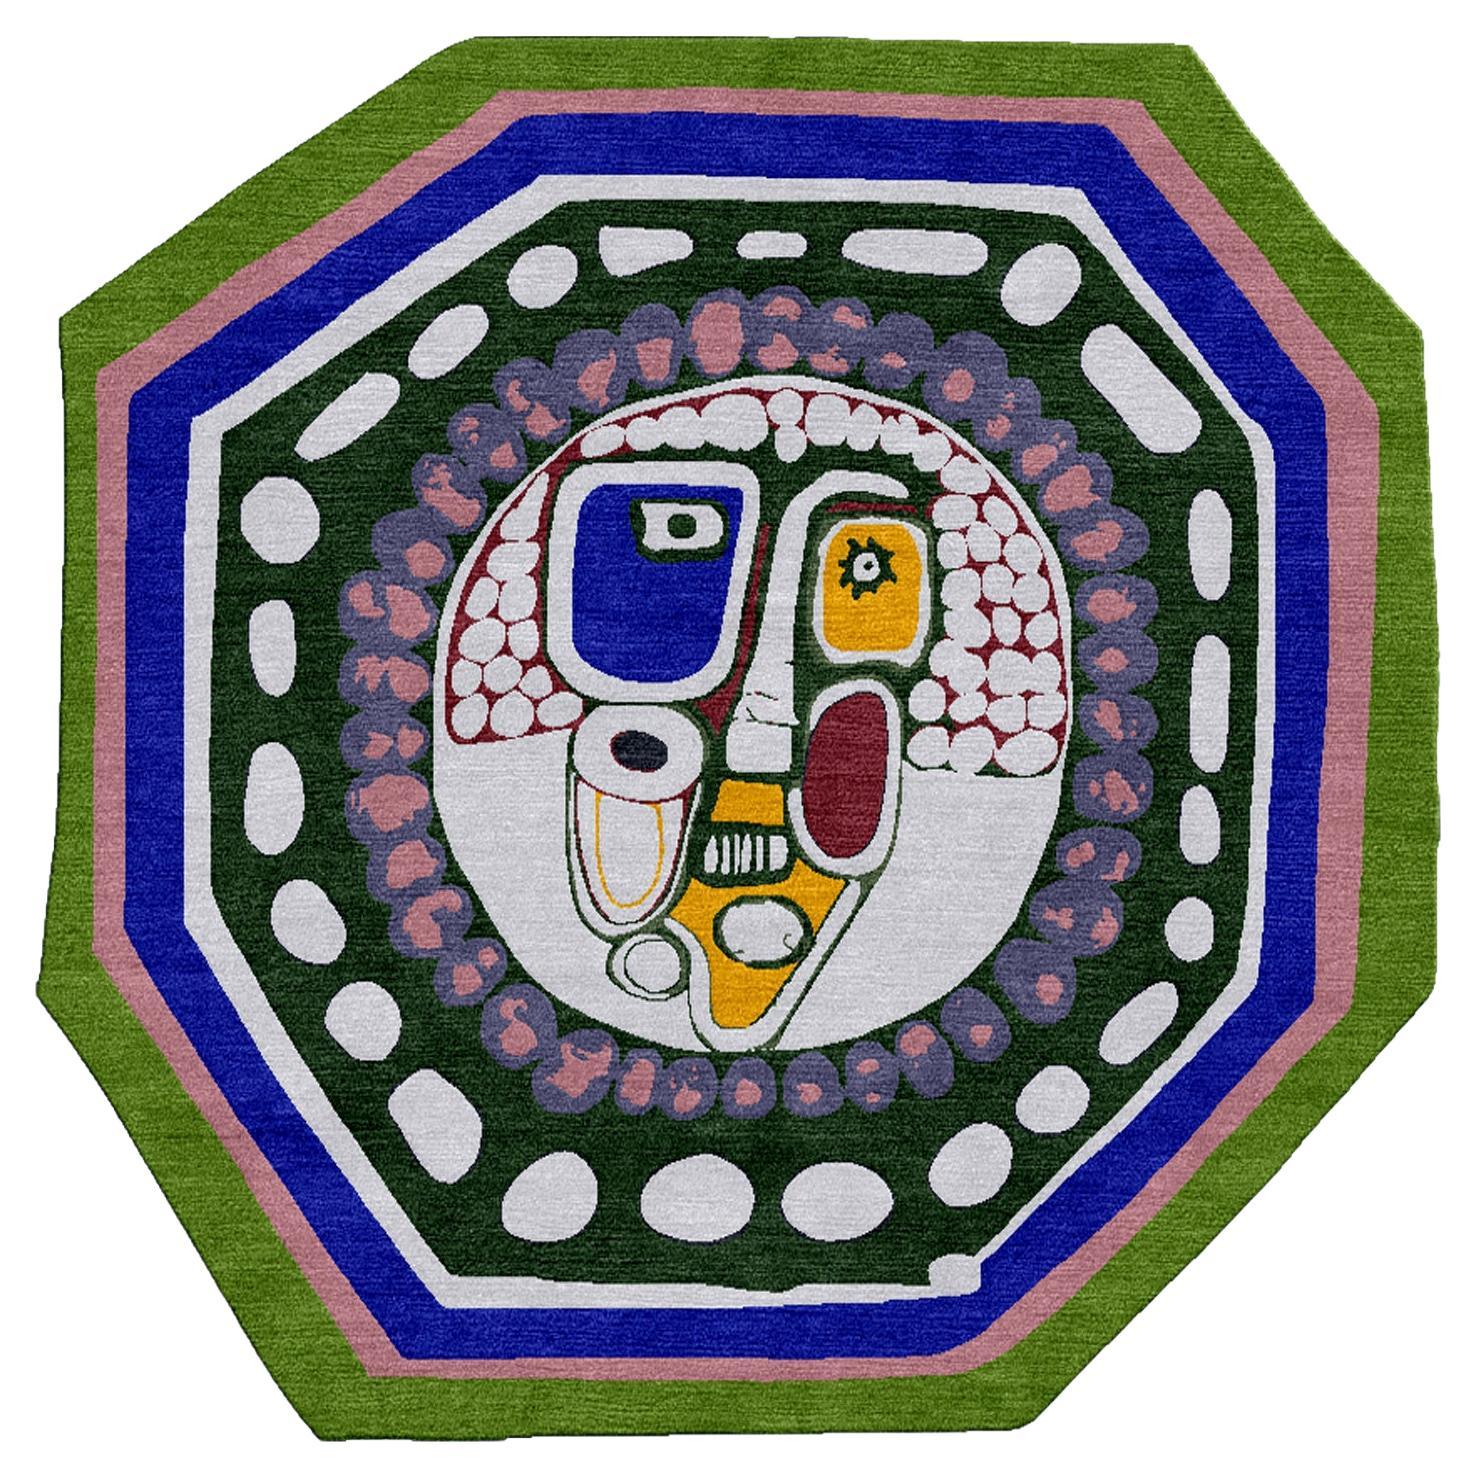 Hand-knotted wool rug "Octagon Girl" by Luis Fernando Benedit